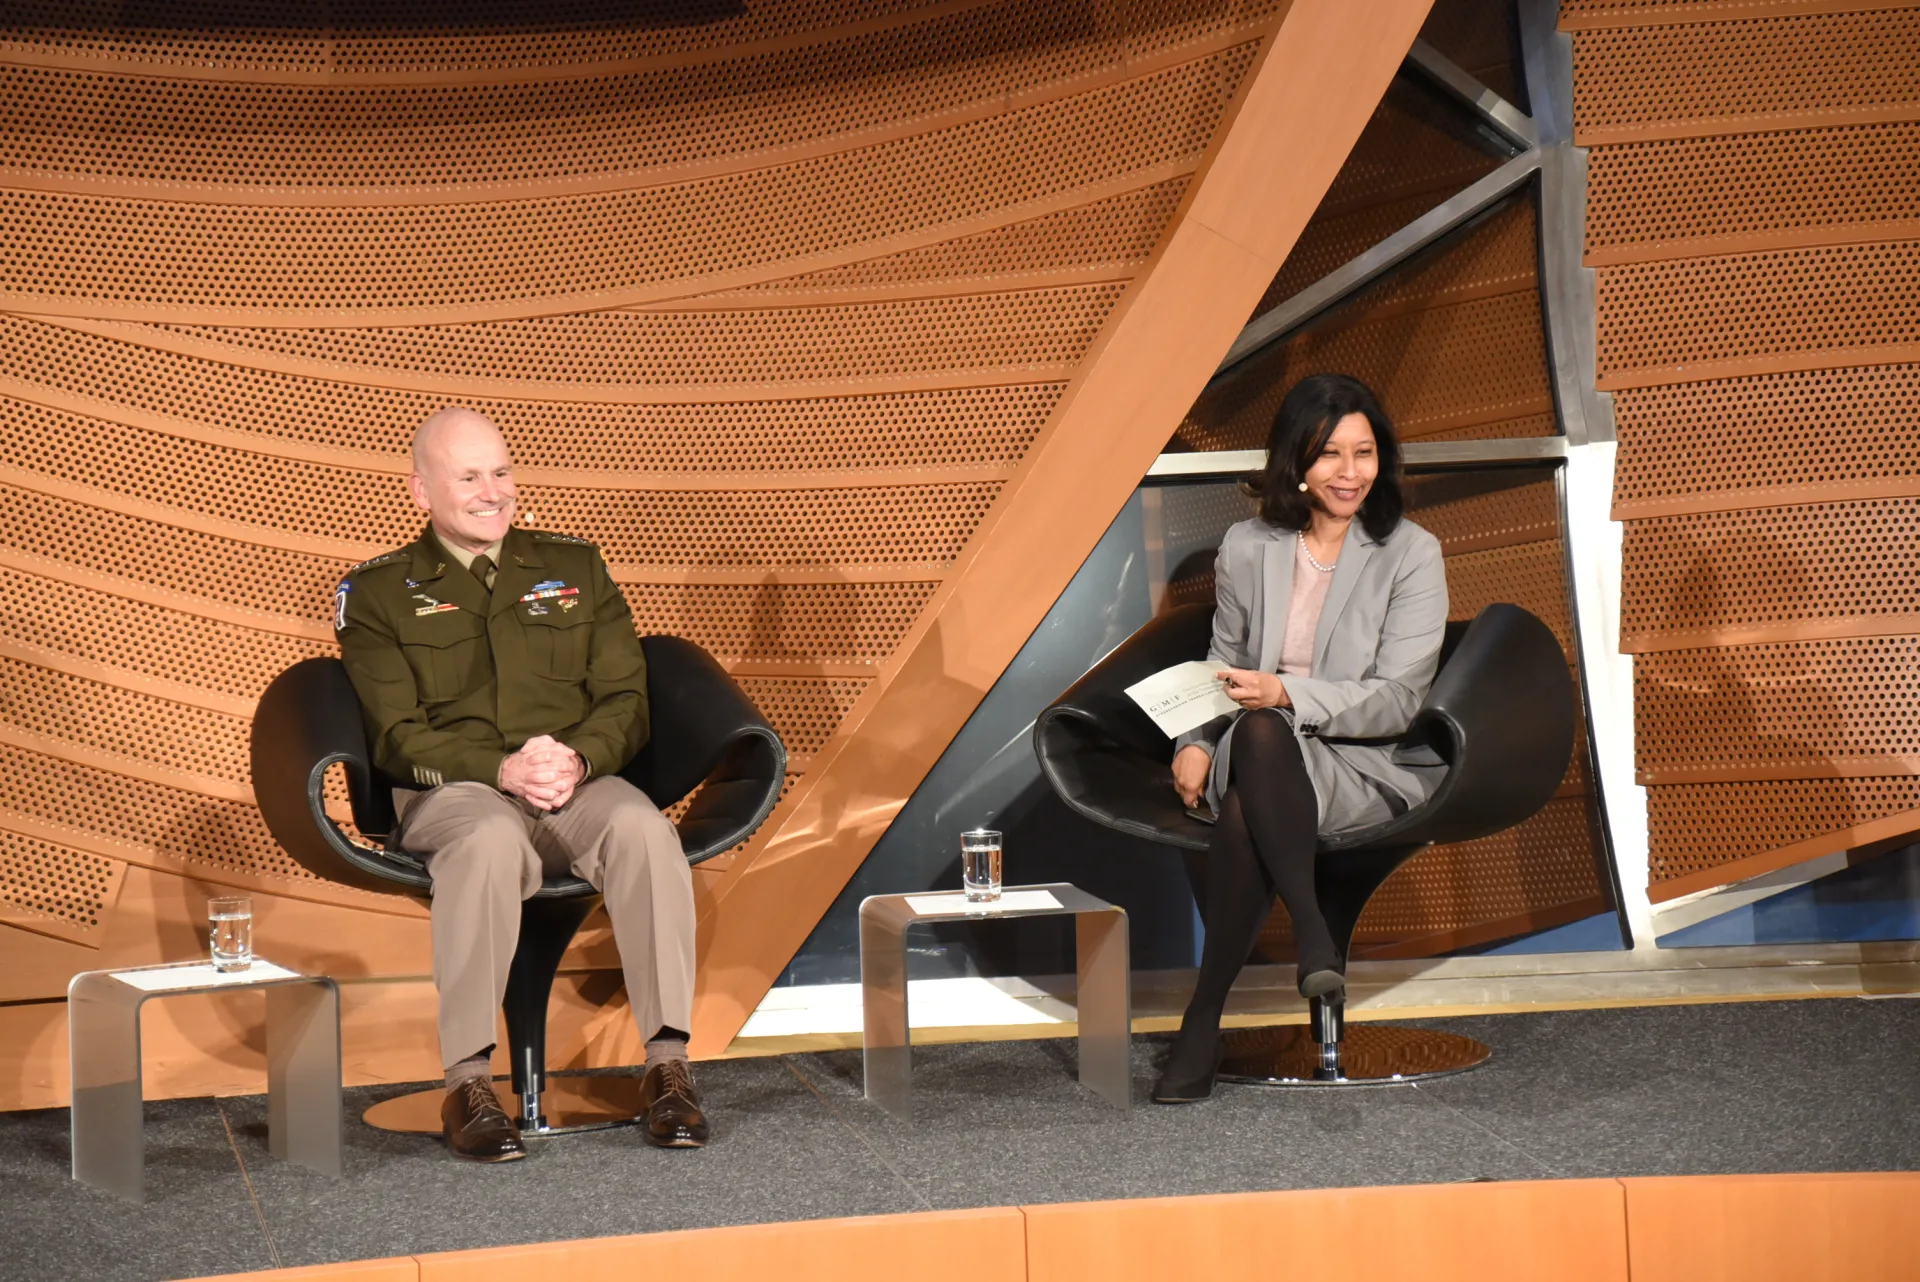 General Christopher G. Cavoli and Sudha David-Wilp discussing at anniversary conference in Berlin, March 2023